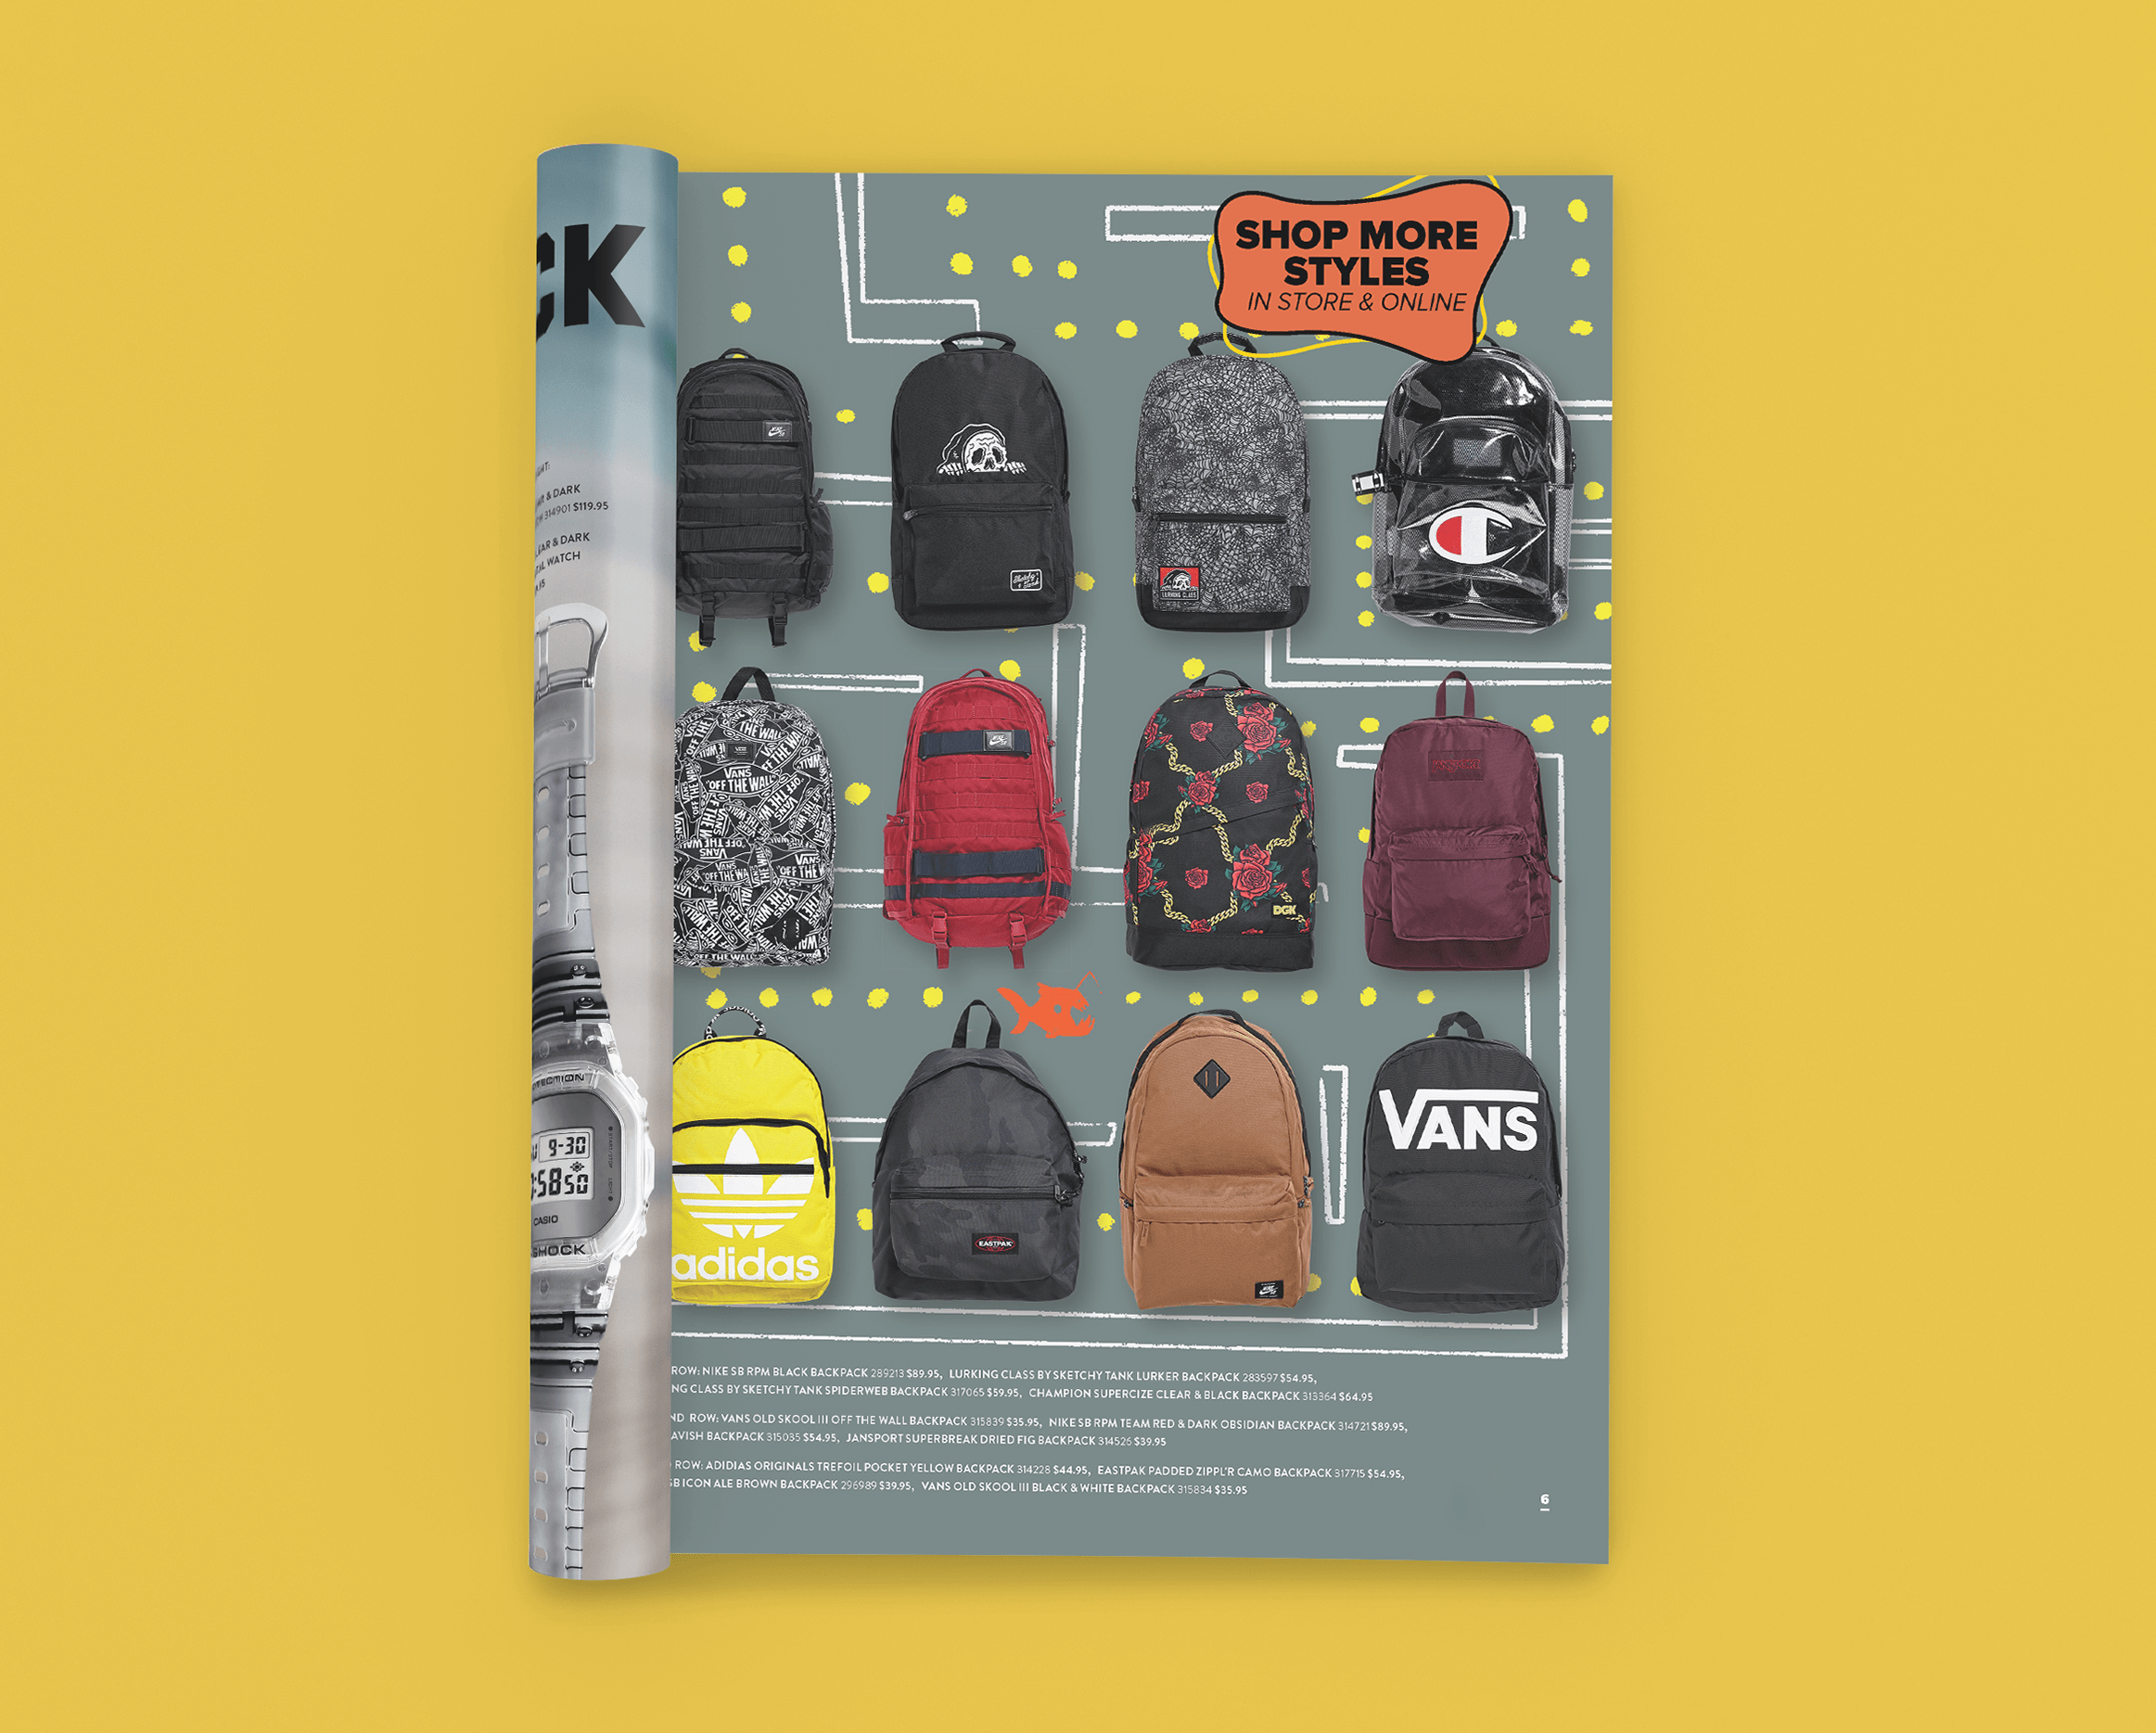 An image showing the backpack page from the Zumiez catalog, featuring 12 backpacks on a background illustration of Pac Man.